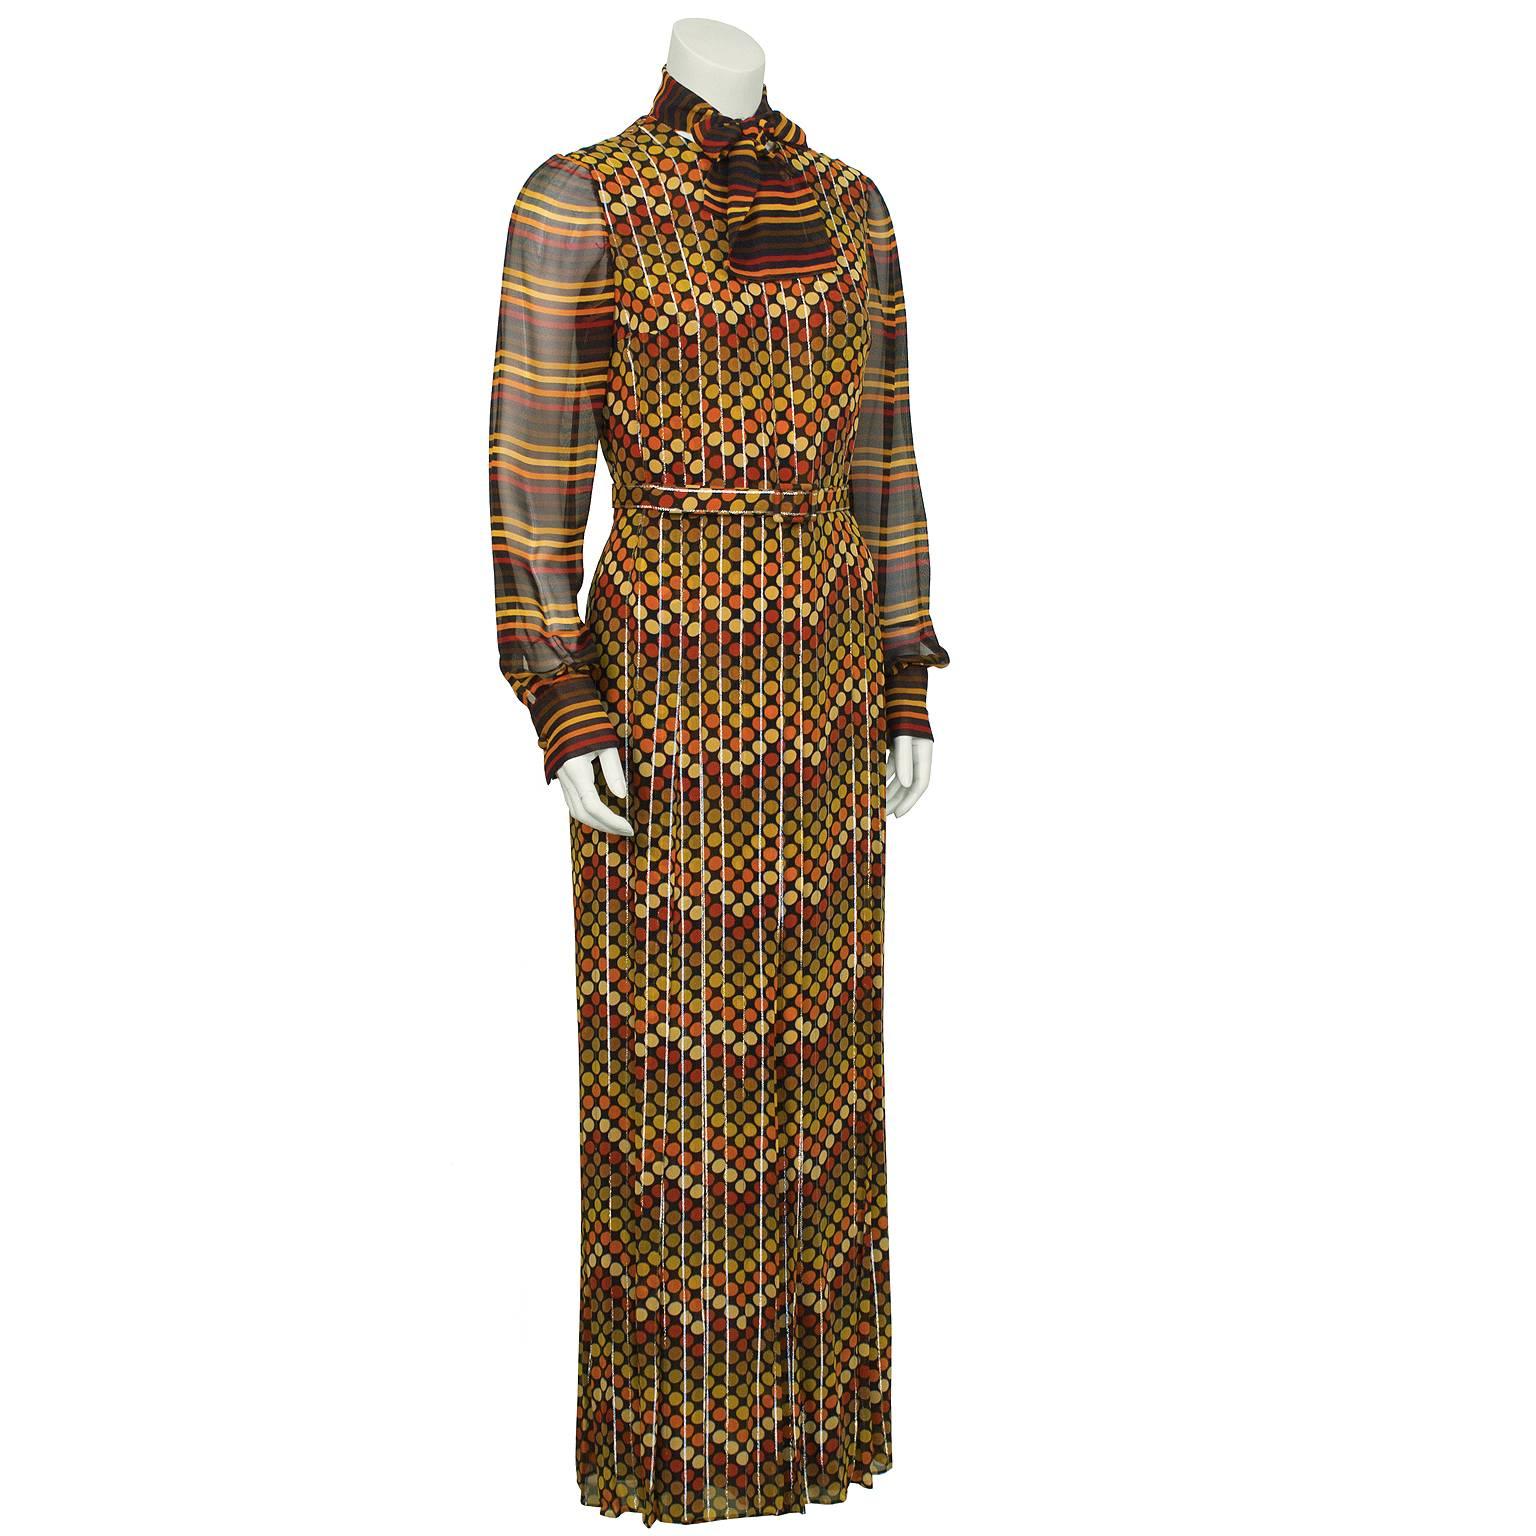 Orange, yellow and silver Italian jacquard silk gown on brown background from the 1970’s with a matching striped neck scarf. The gown has a high rounded neckline and is fitted through the body. The pleated skirt falls from the waist, partially